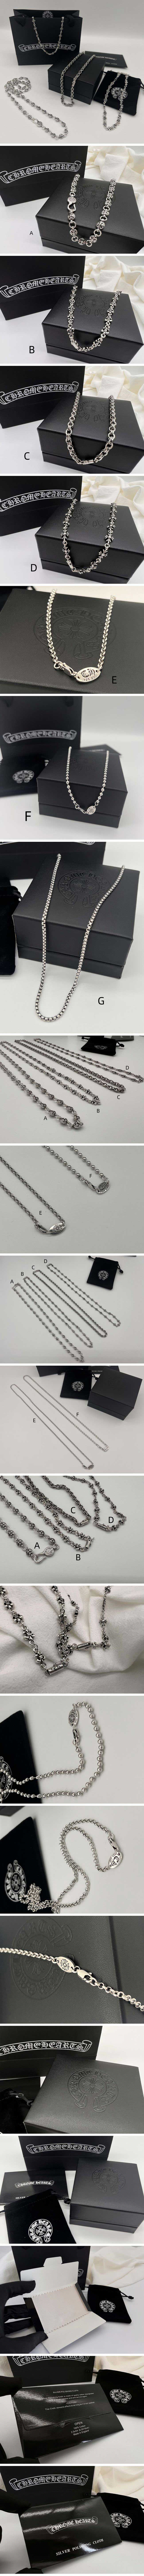 Chrome Hearts SV925 Chain Necklace 7 Type クロムハーツ ネックレス チェーン 7タイプ ※ペンダント別売り